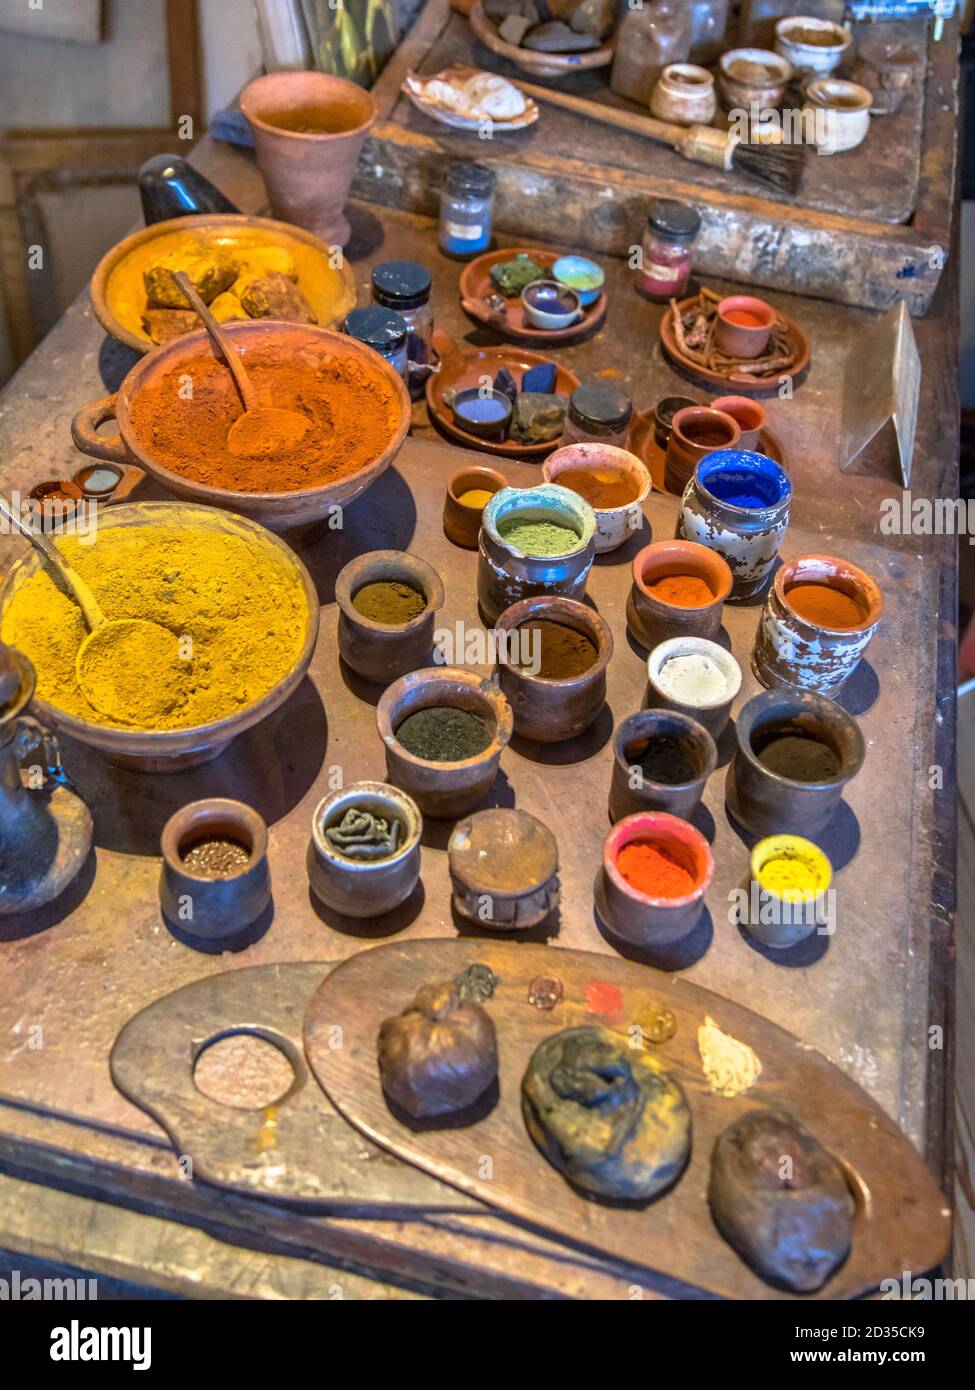 Pigments powders for oil paints like they were made by dutch master painters in golden age 17th century in Amsterdam Stock Photo